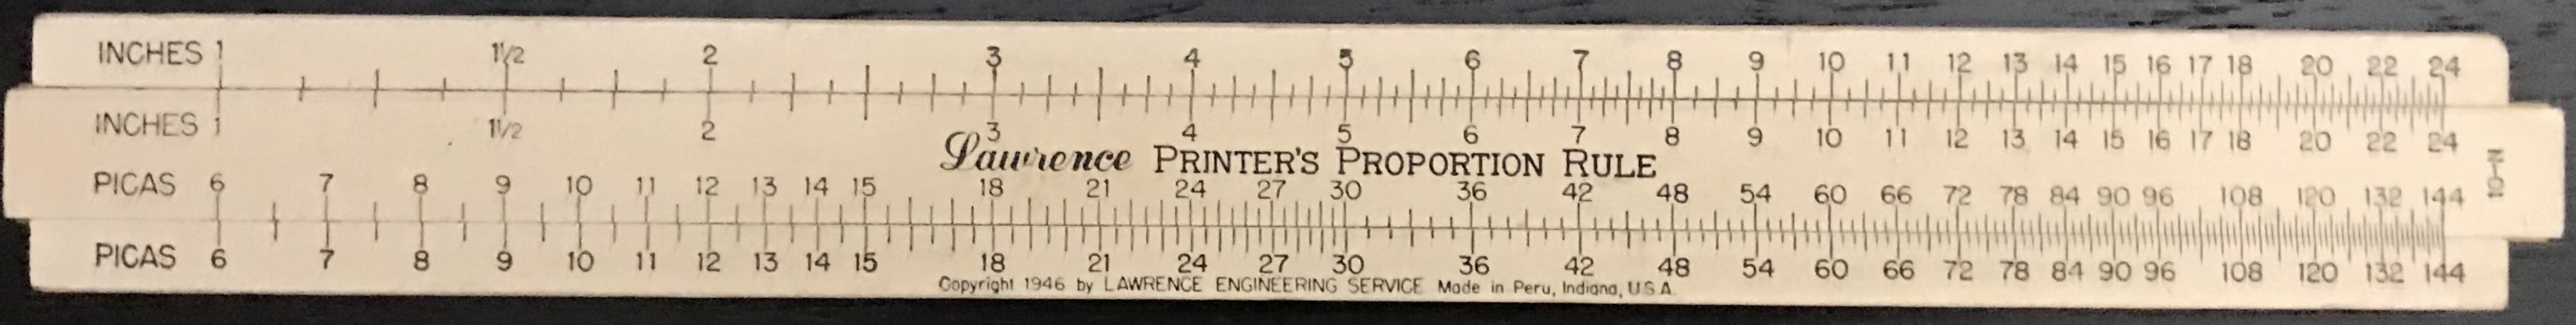 Lawrence Printer’s Proportion Rule, c. 1946.